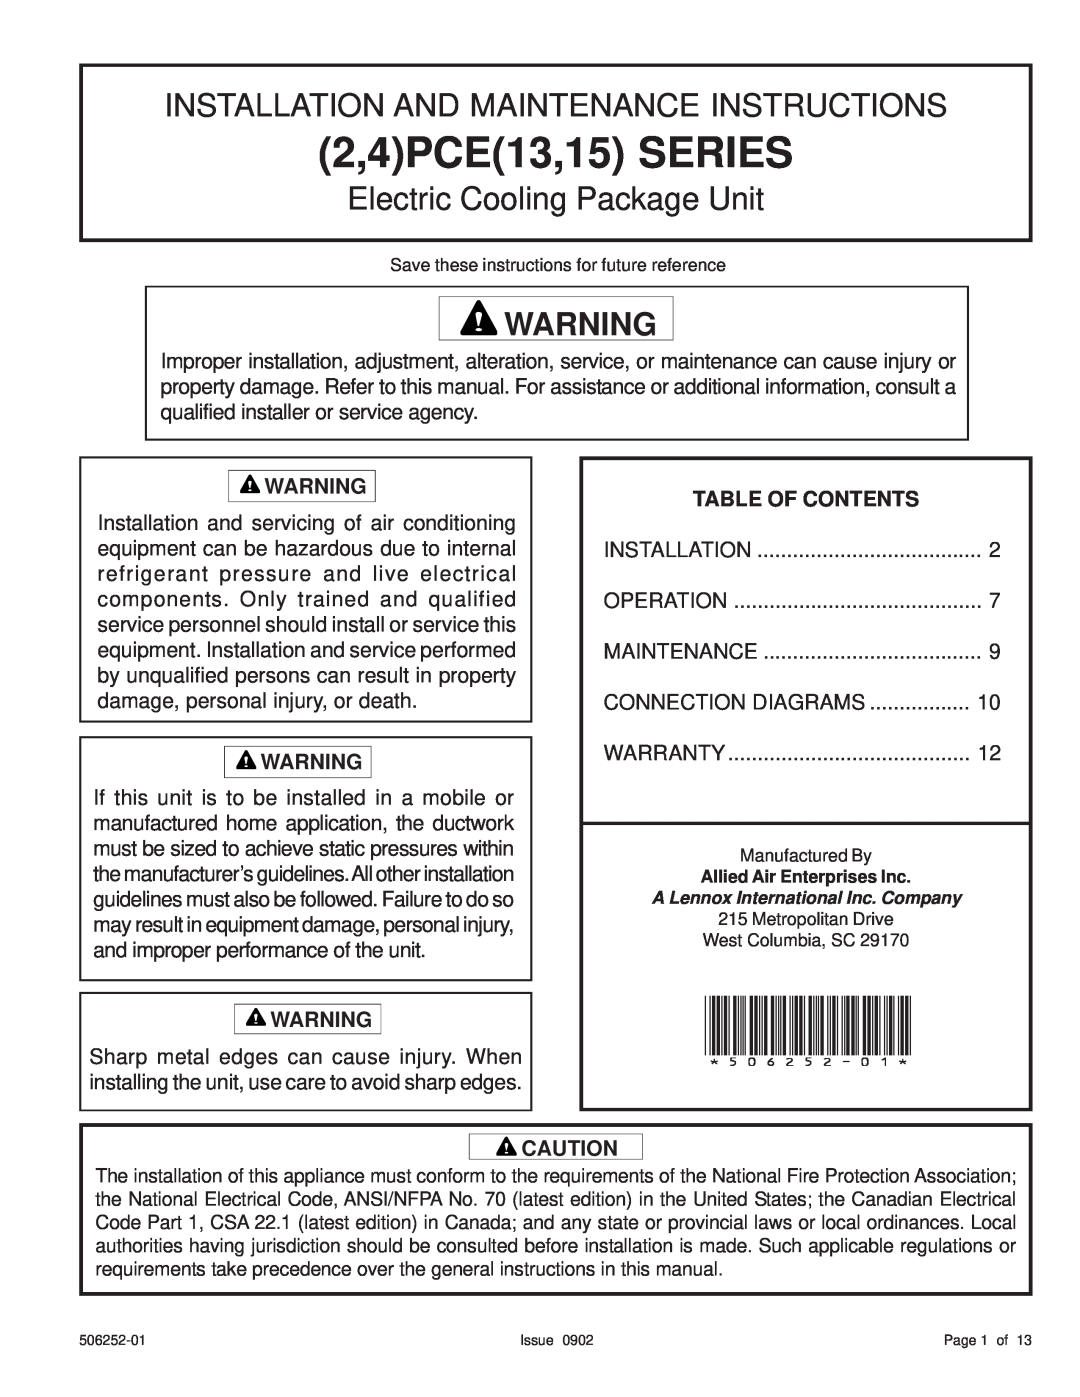 Allied Air Enterprises (2 warranty 2,4PHP13,15 Series, Installation And Maintenance Instructions, Self-ContainedHeat Pump 